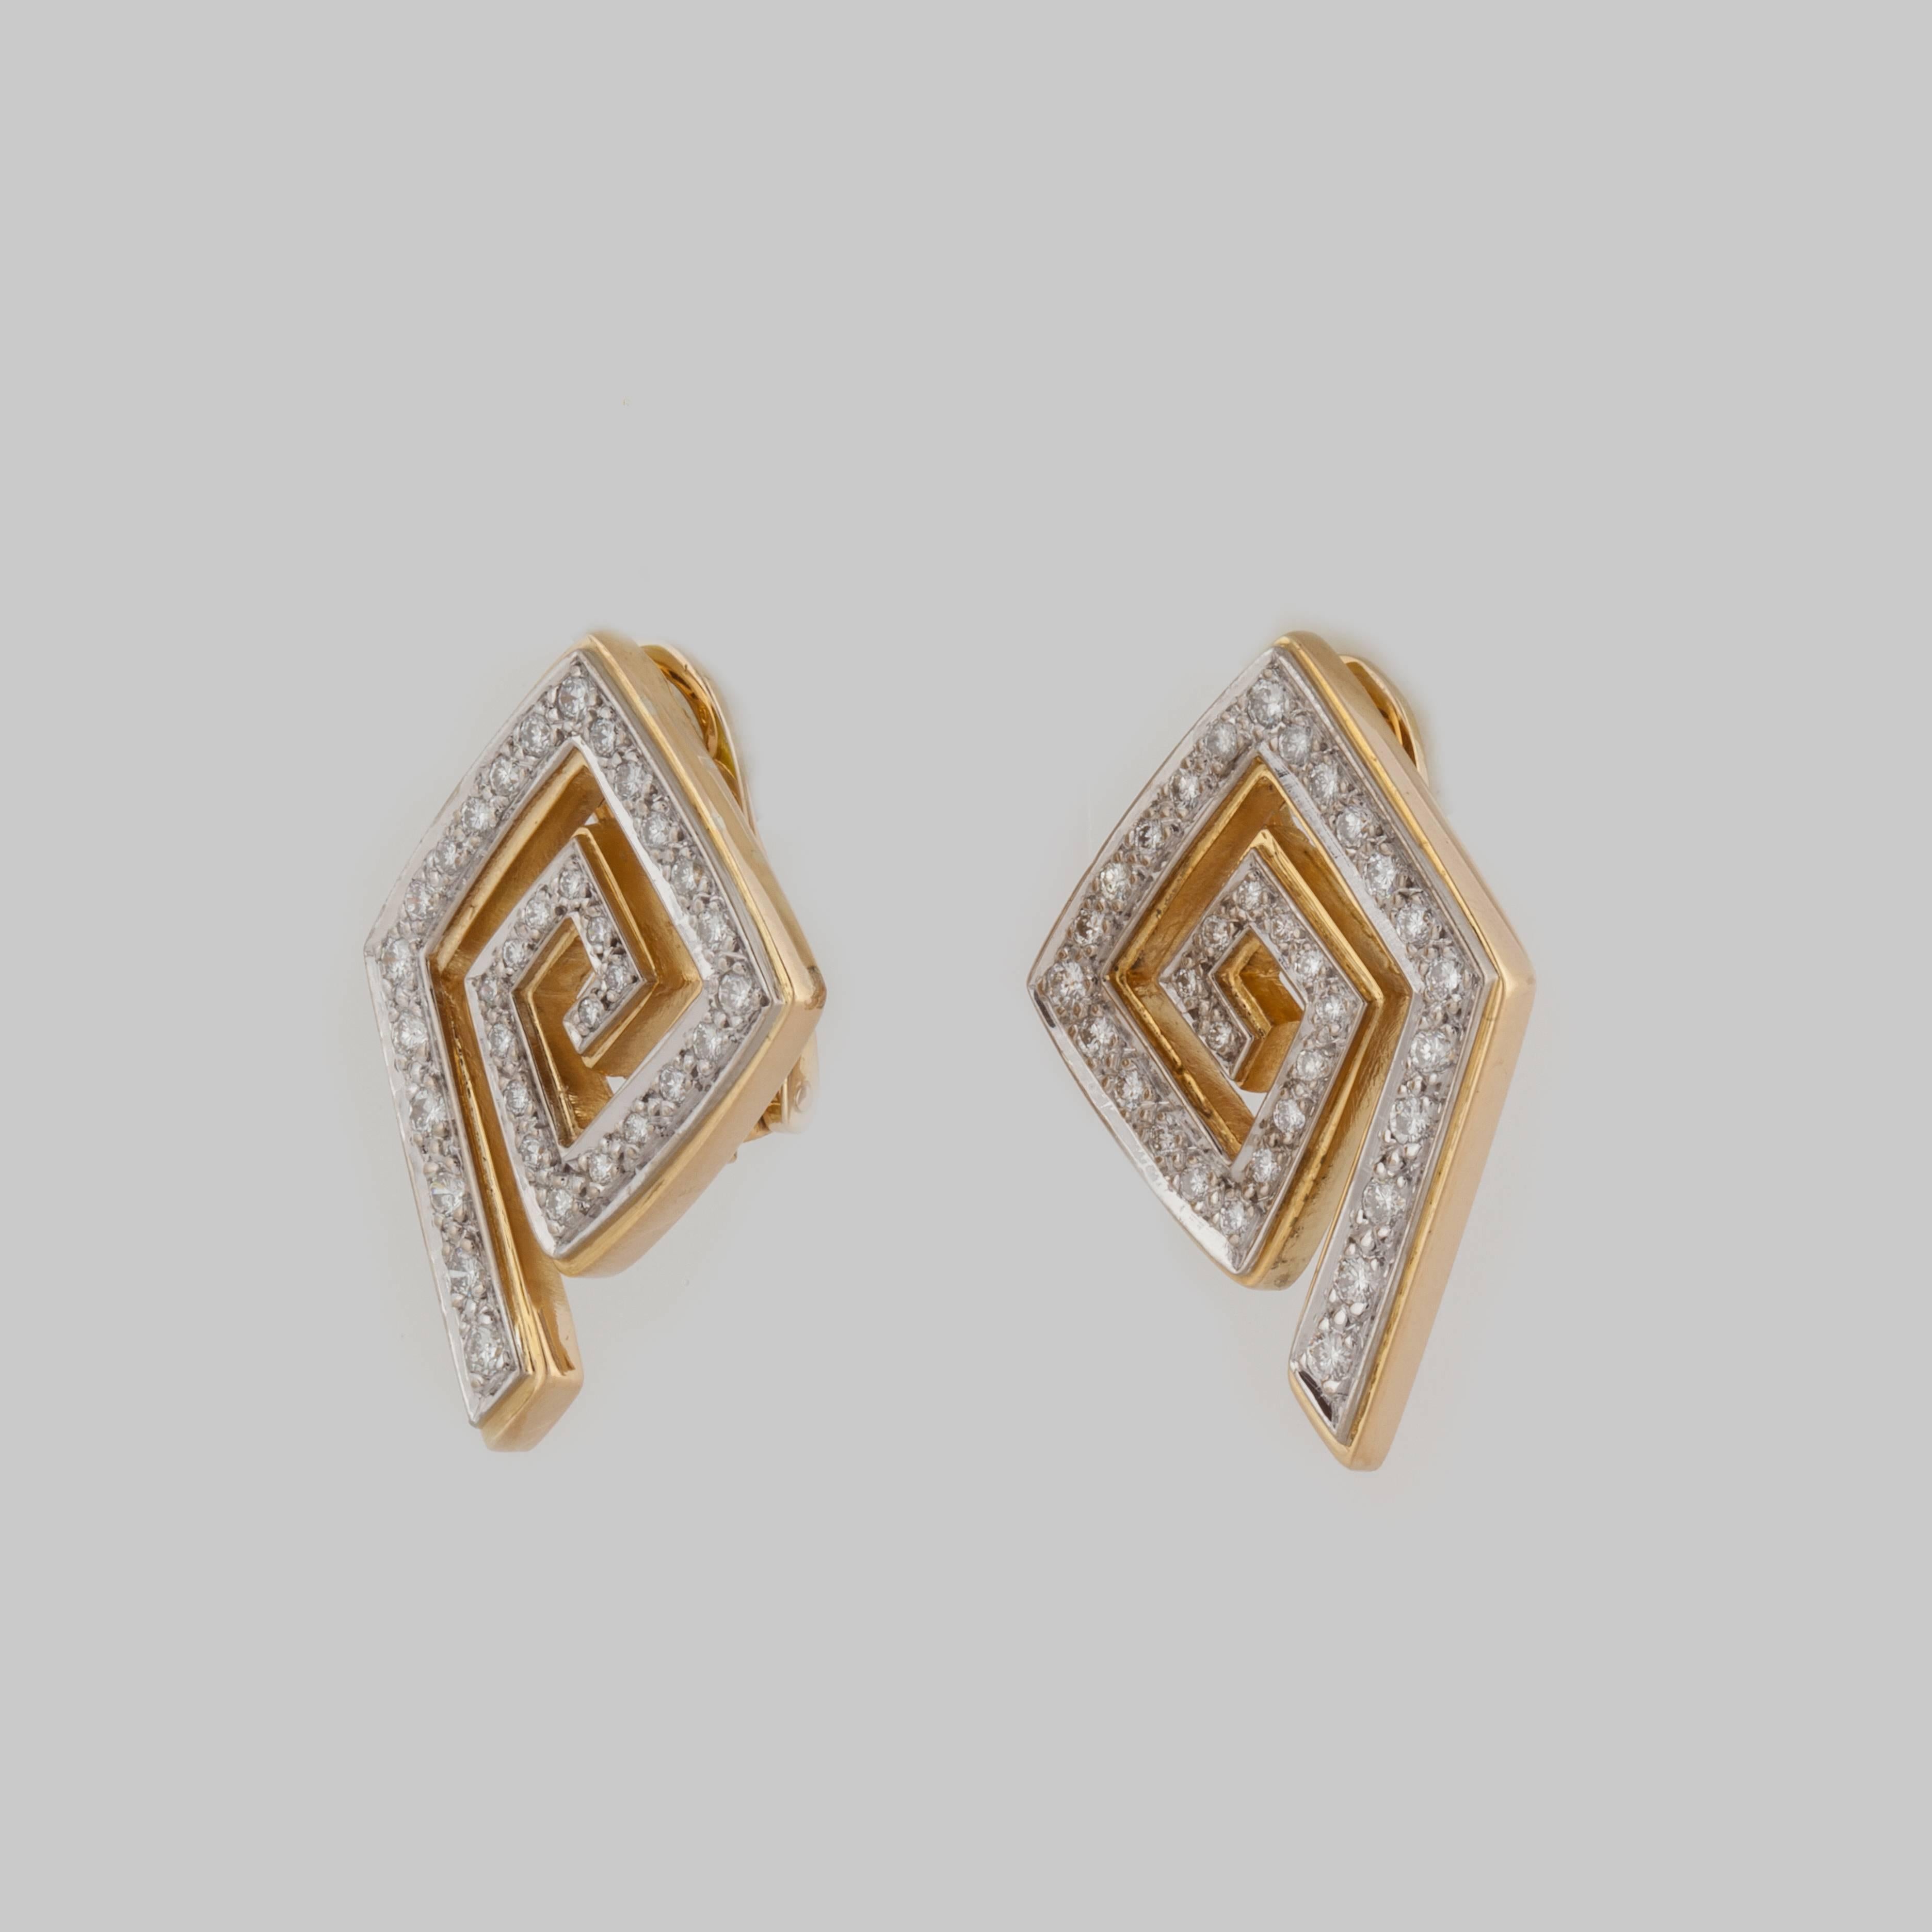 18K yellow gold and diamond earrings by Greek designer LaLaounis.  They are shaped in a geometric spiral with sixty-six (66) round diamonds that total 1.20 carats, G-H color and VS-SI clarity.  They measure 1 1/4 inches long and 7/8 inches wide. 